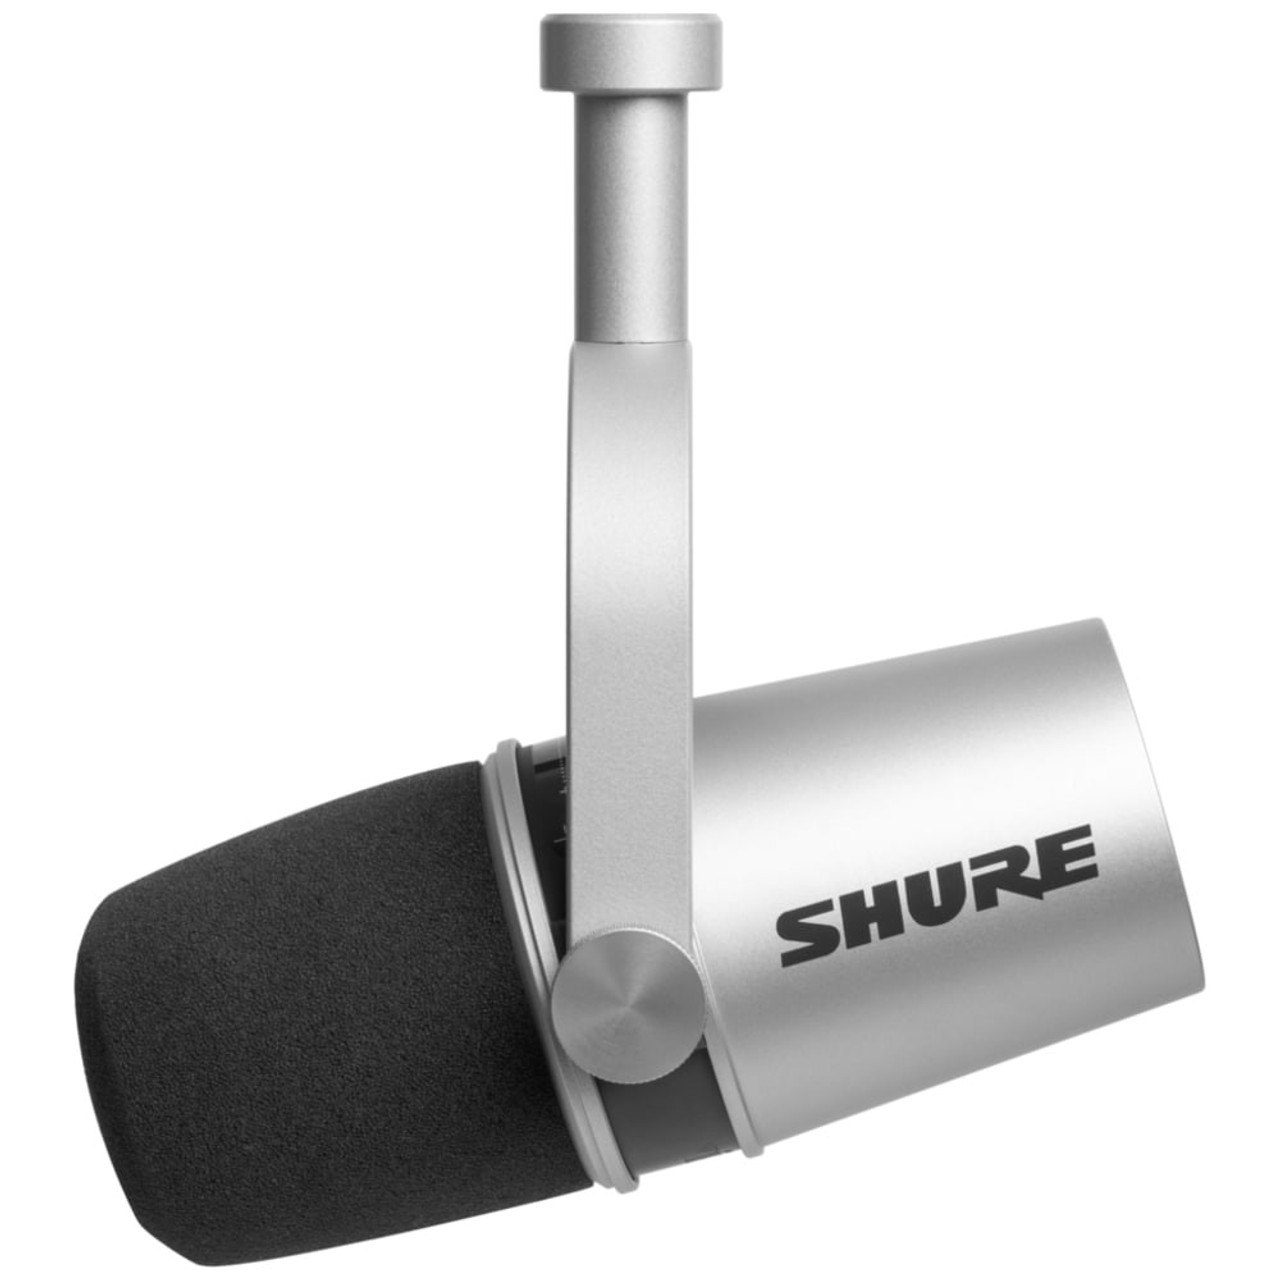 Shure unveils its first hybrid XLR/USB mic – the MV7 Podcast Microphone